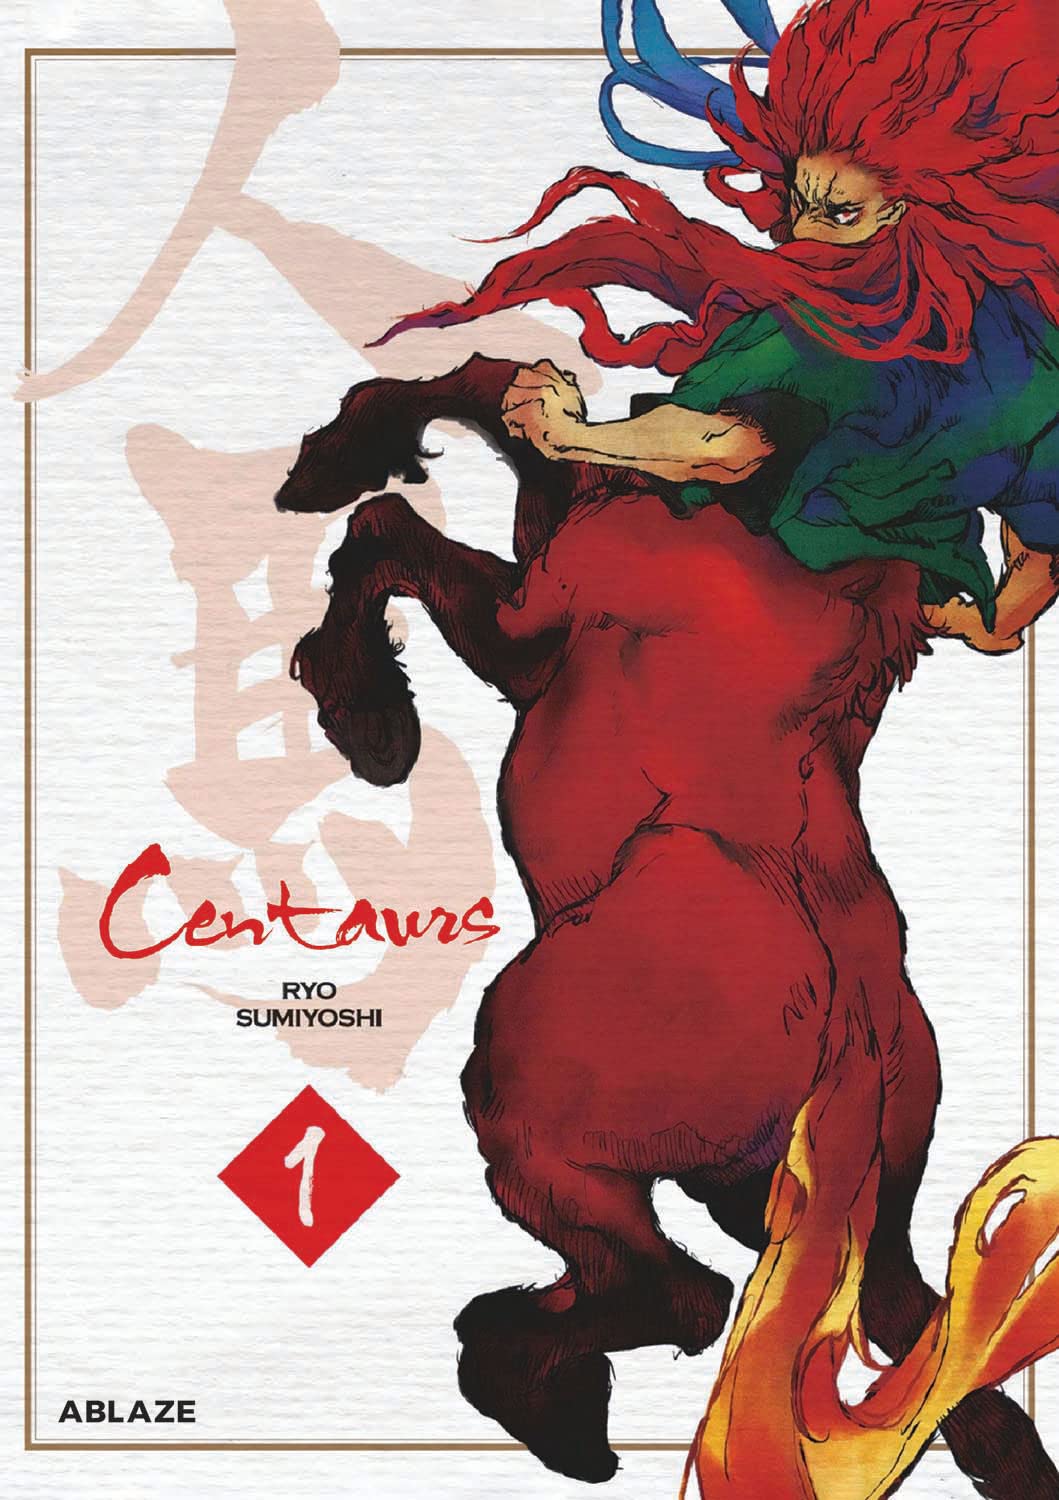 Centaurs GN 1 – Review